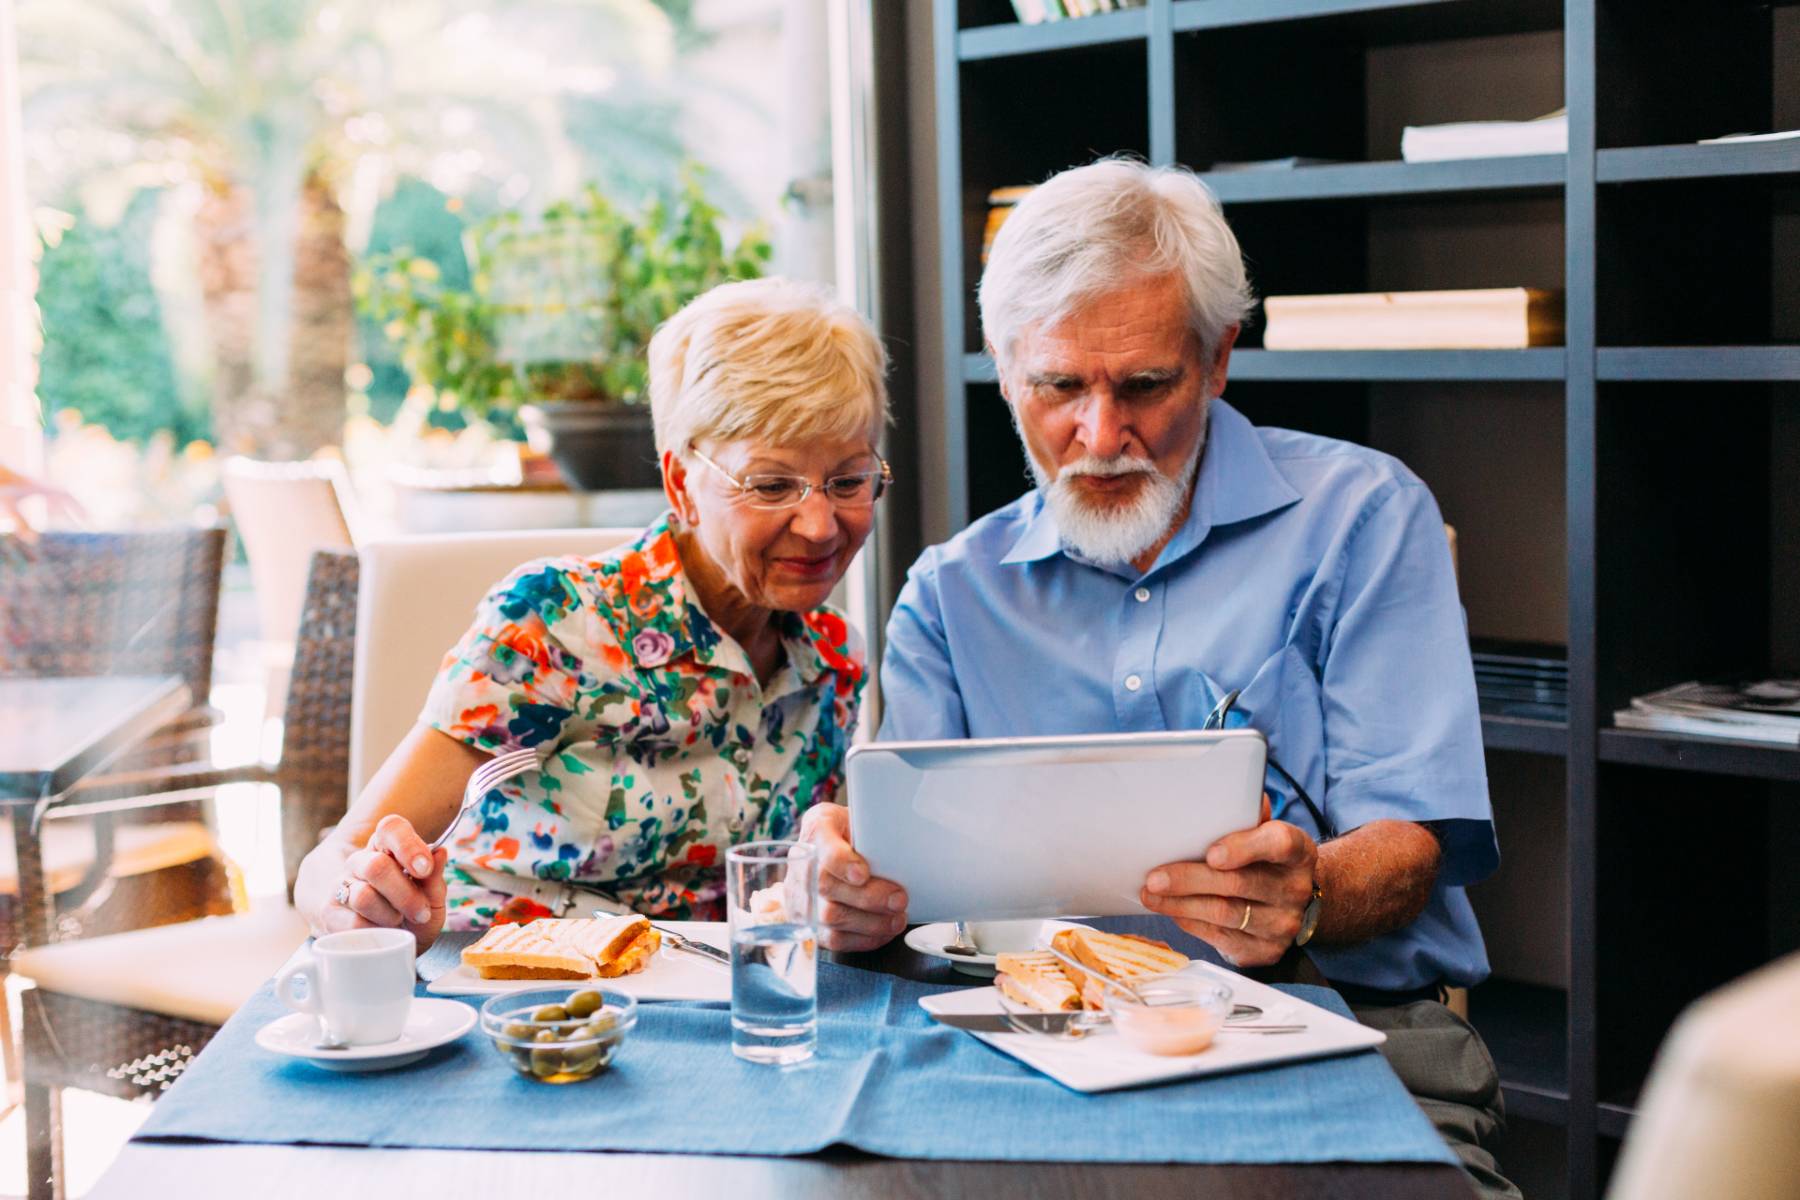 A senior couple enjoy breakfast and look at an ipad or tablet together